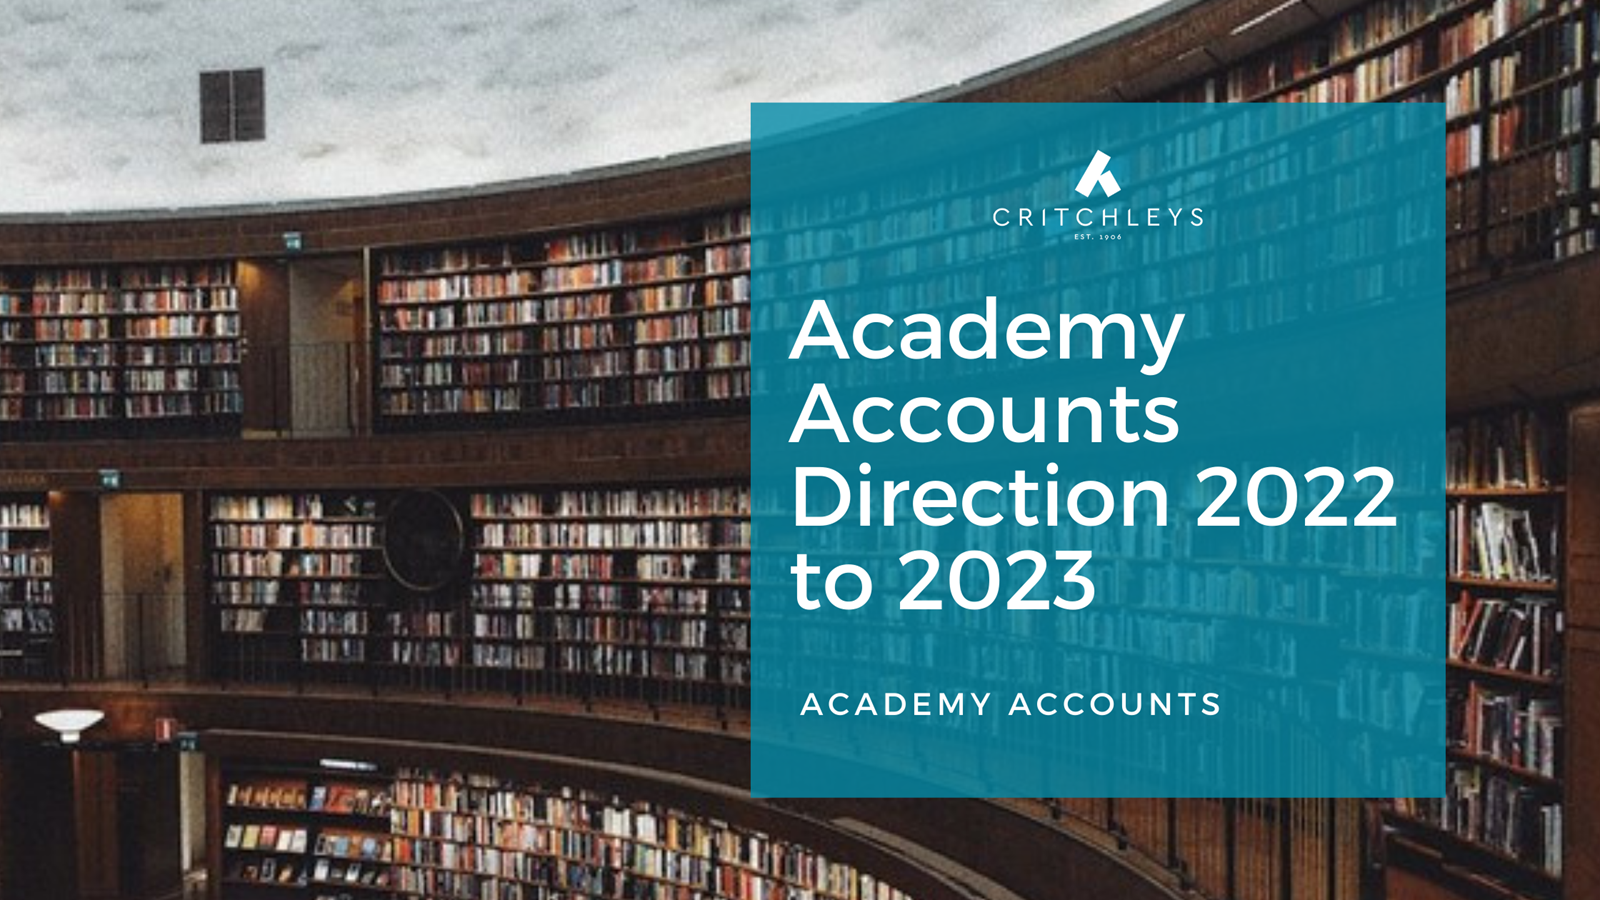 Academy Accounts Direction 2022-2023 What’s New and Why?